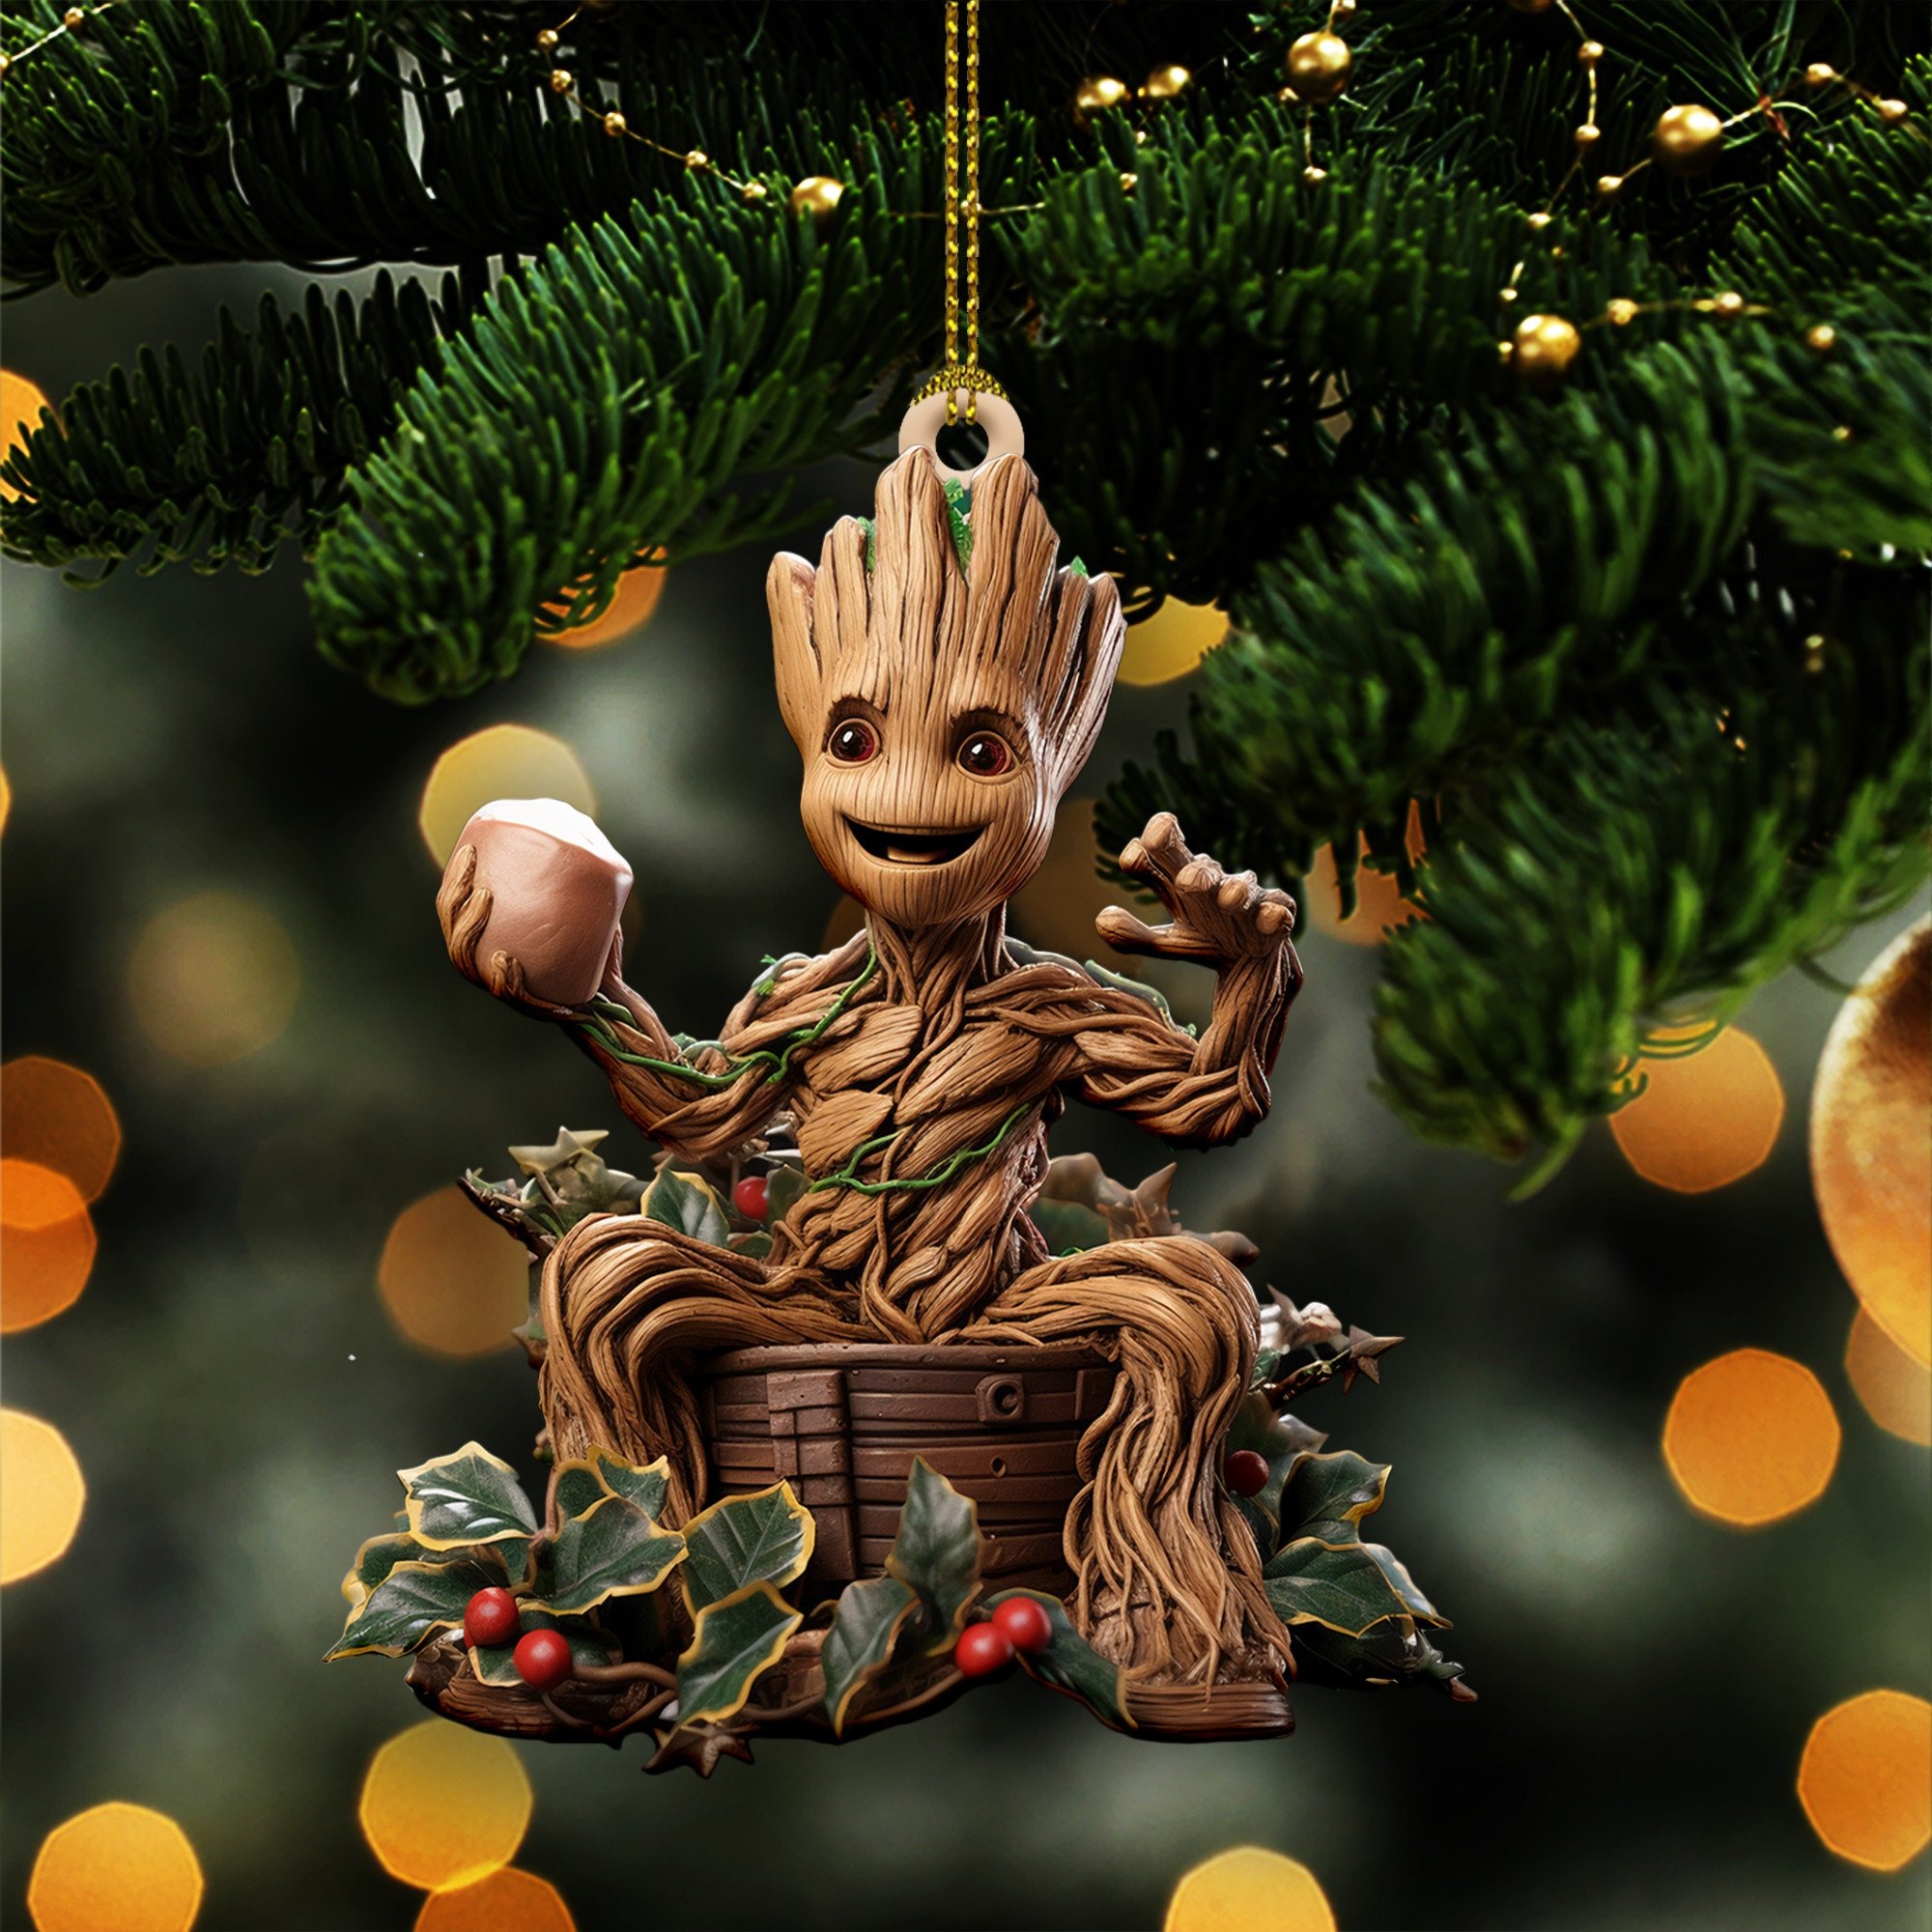 The Groot Christmas Ornament